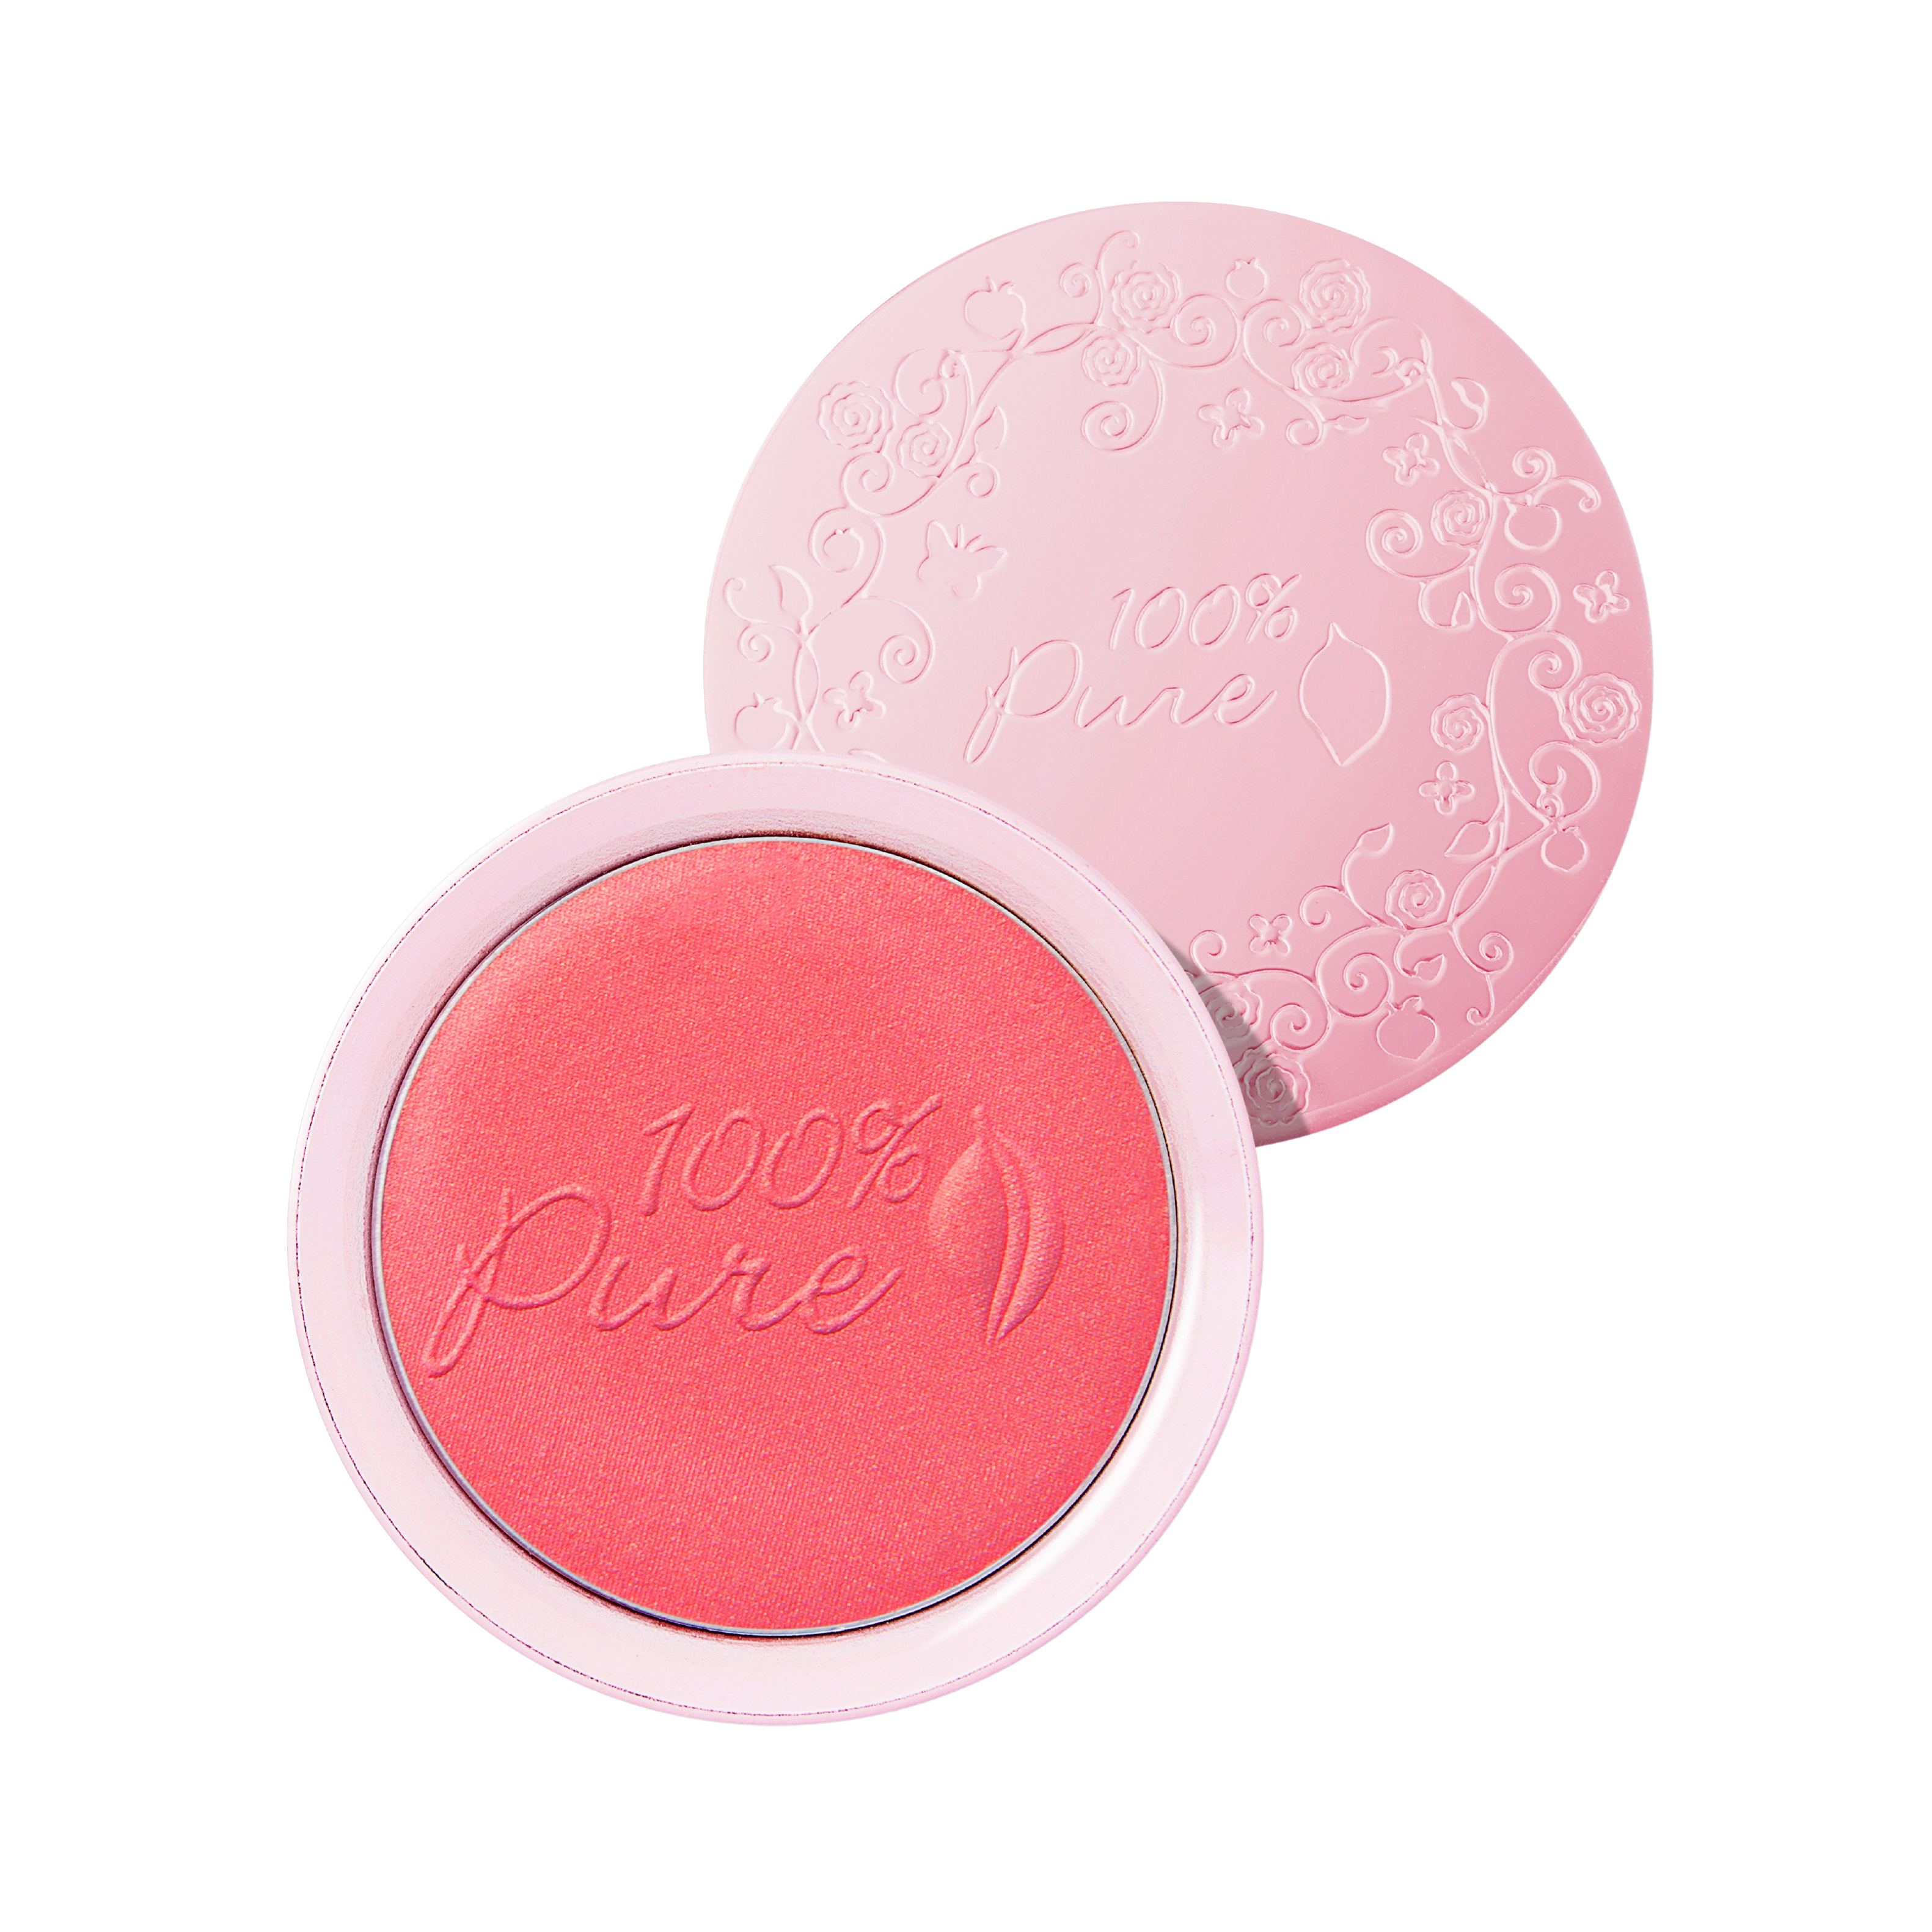 Load image into Gallery viewer, 100% Pure Fruit Pigmented® Blush
